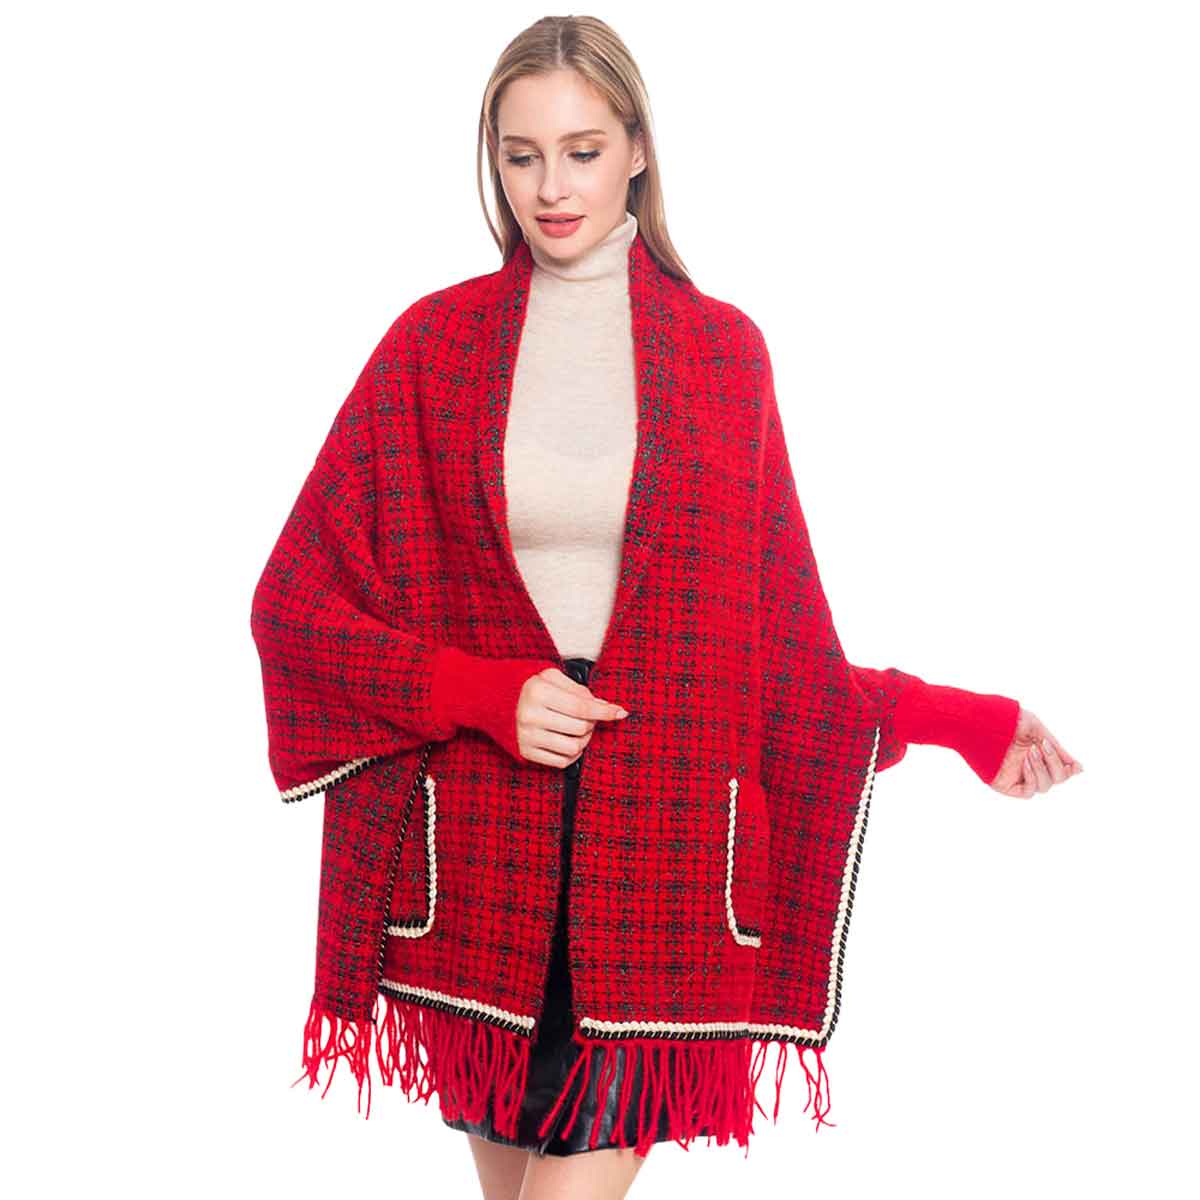 White Plaid Check Patterned Poncho, is the perfect representation of beauty and comfortability for this winter. It will surely make you stand out with its beautiful color variation. It goes with every winter outfit and gives you a unique yet beautiful outlook everywhere. You can throw it on over so many pieces elevating any casual outfit! Perfect Gift for Wife, Mom, Birthday, Holiday, Christmas, Anniversary, Fun Night Out. Stay warm and toasty!